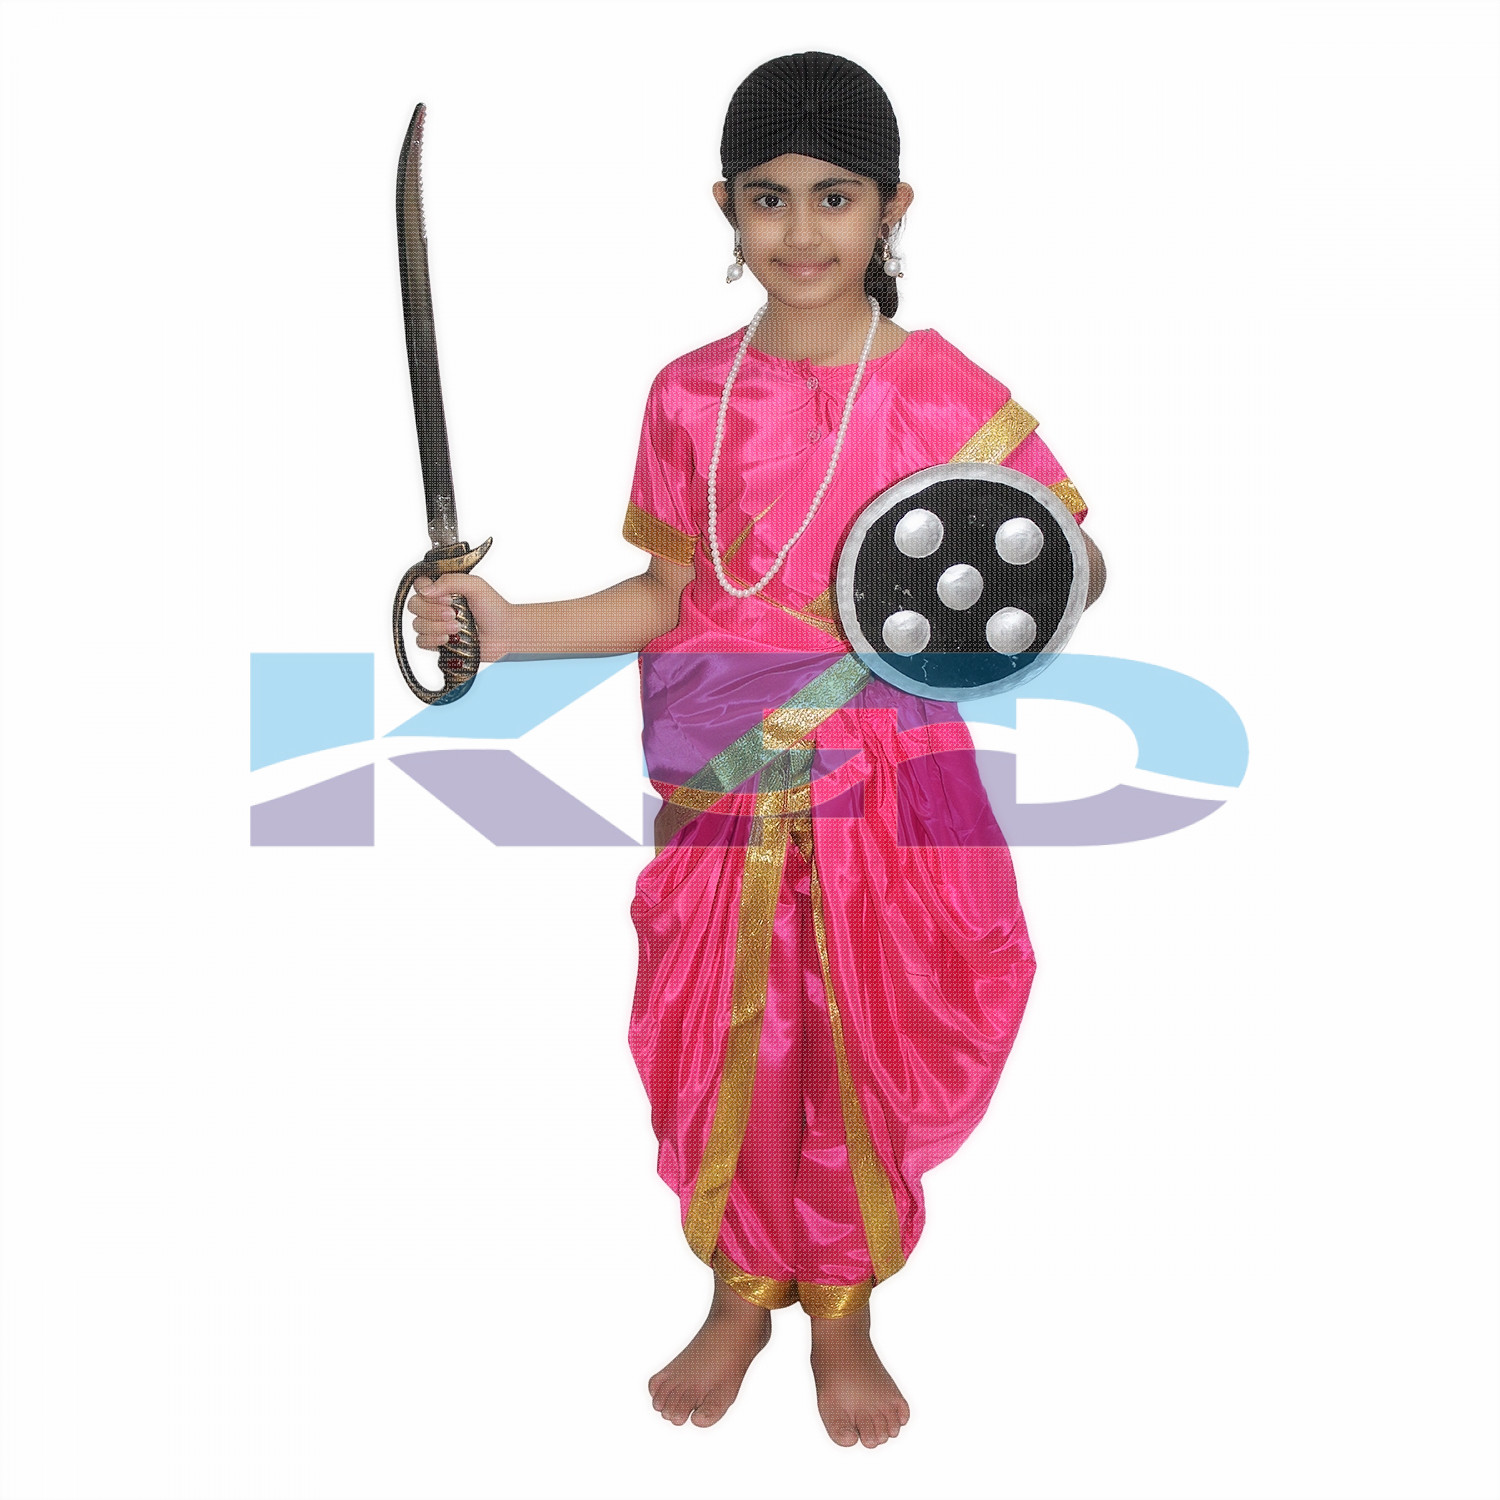 Rani Laxmi Bai Mazanta National Hero/freedom fighter Costume for Independence Day/Republic Day/Annual function/theme party/Competition/Stage Shows Dress